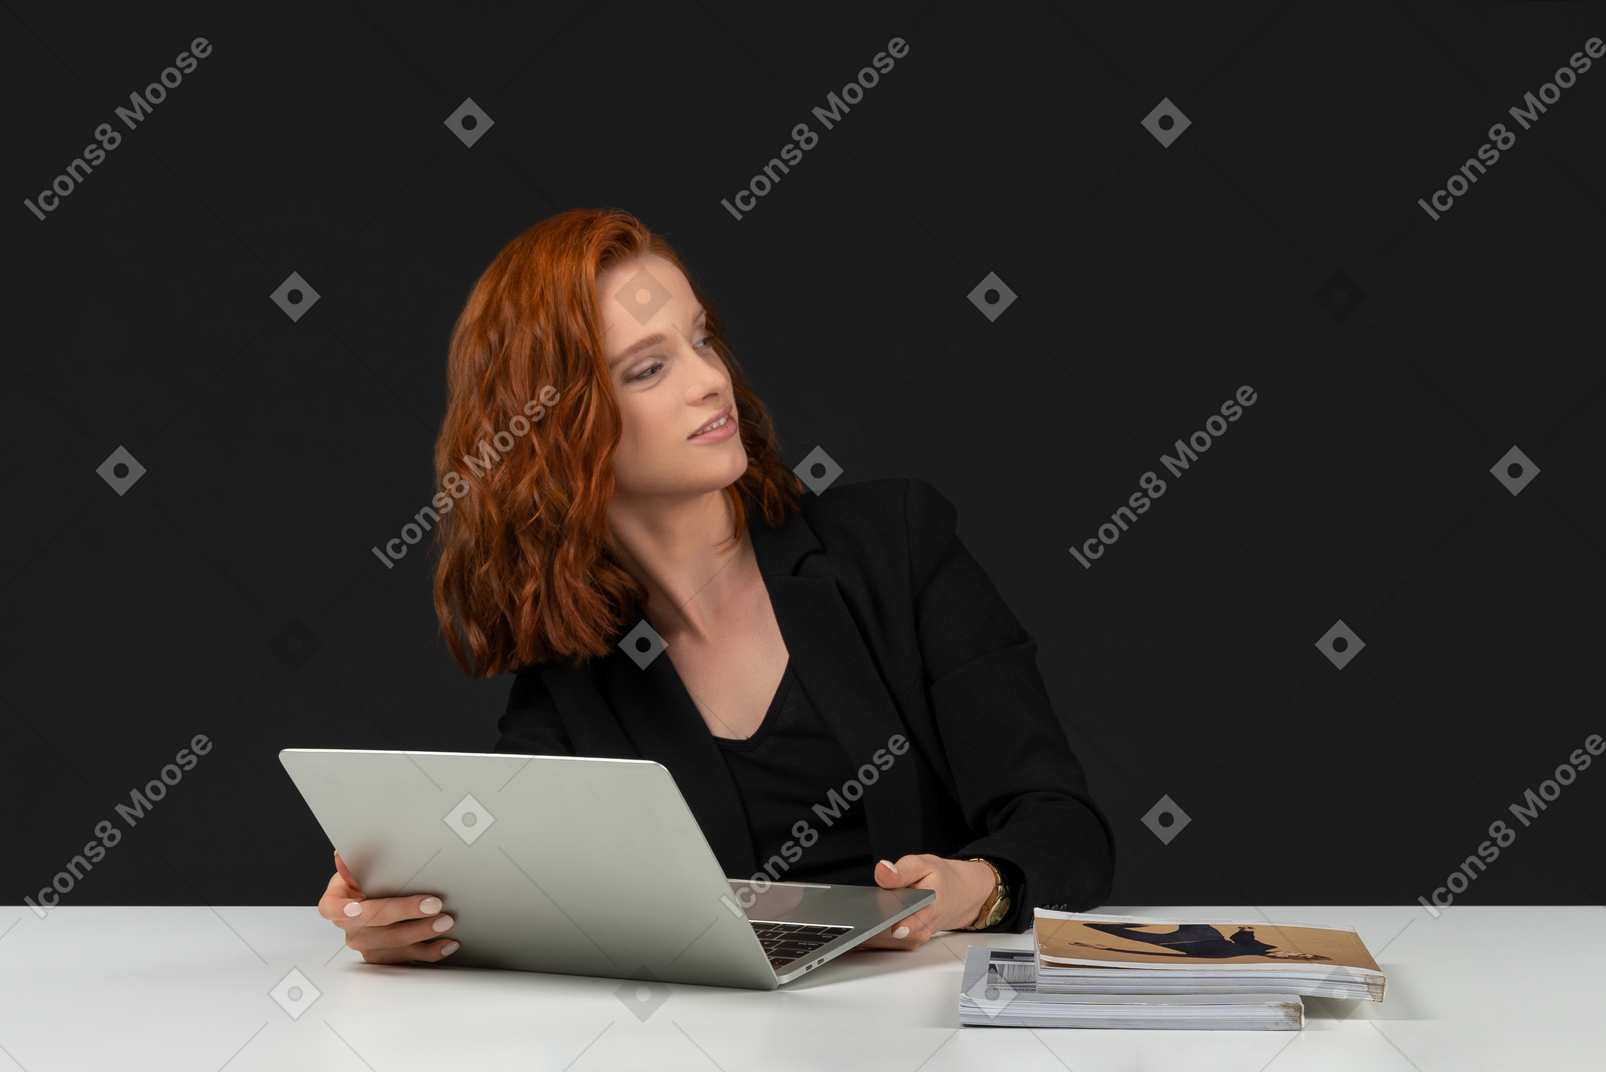 Cute business lady holding the laptop